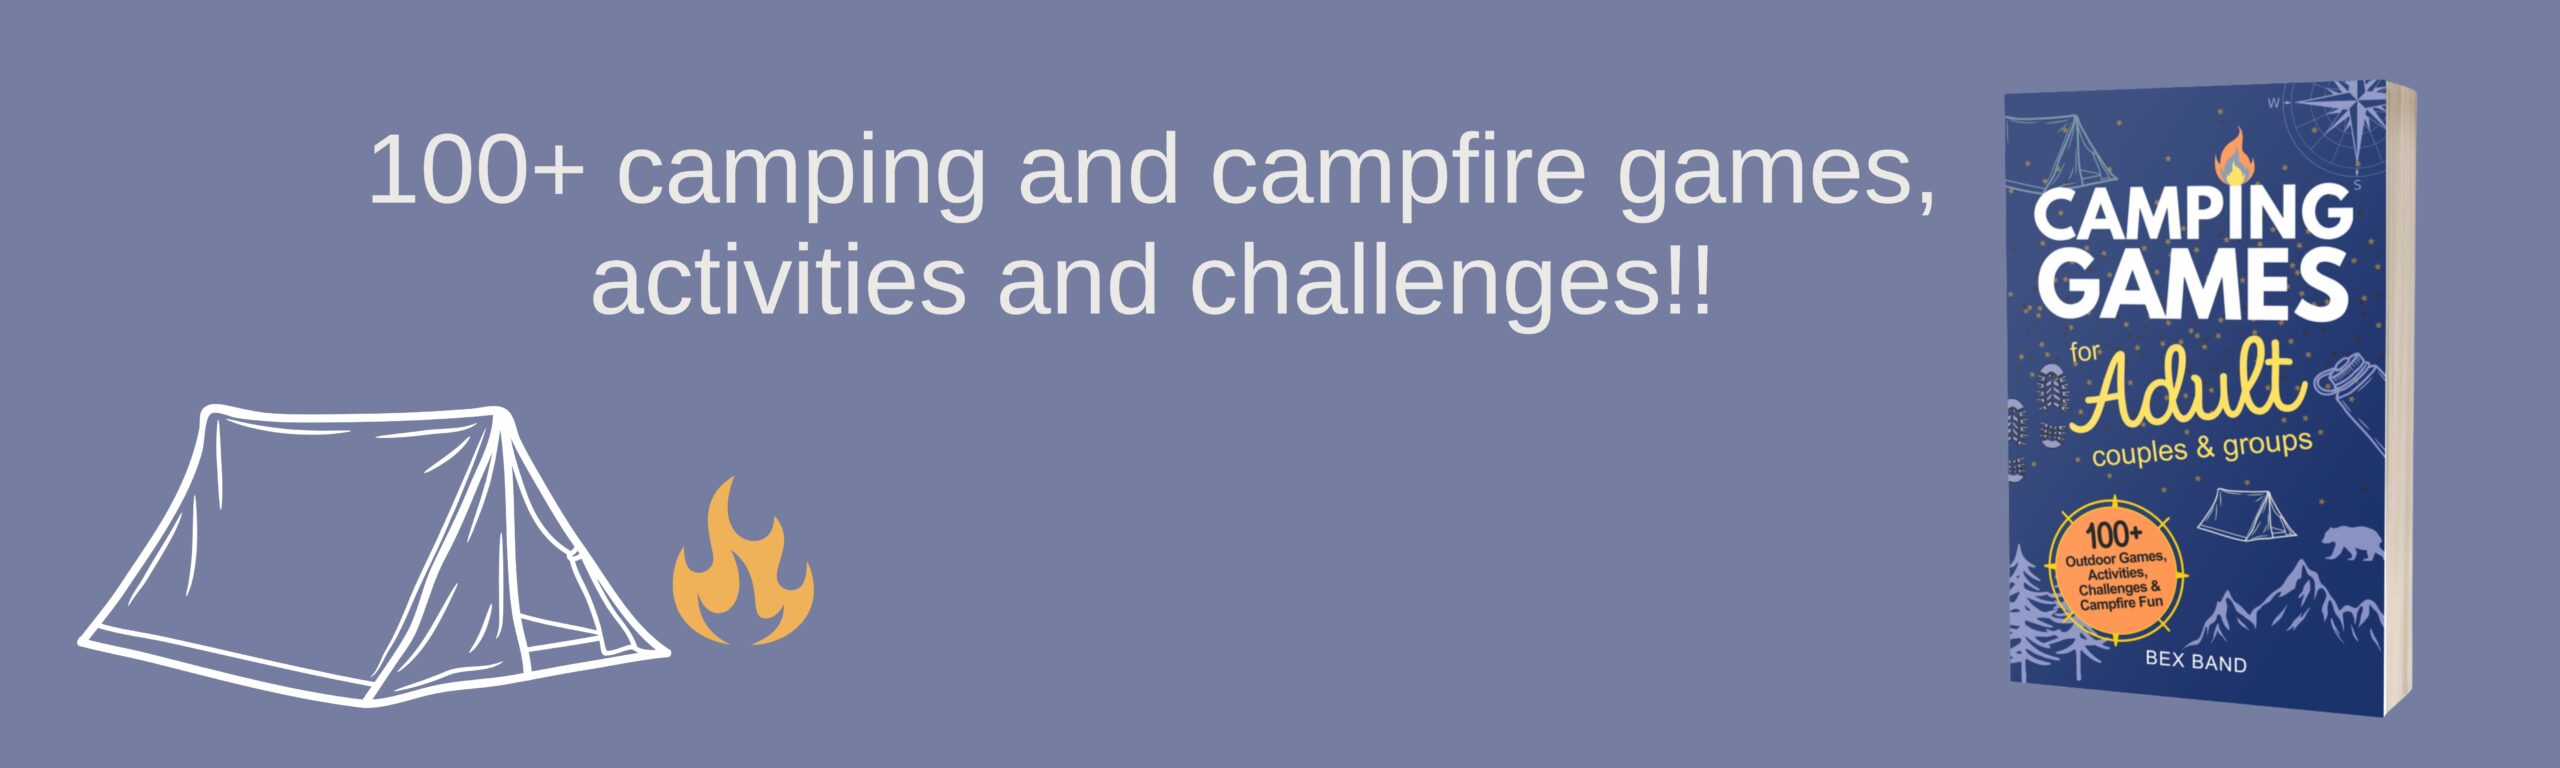 Camping games for adult couples